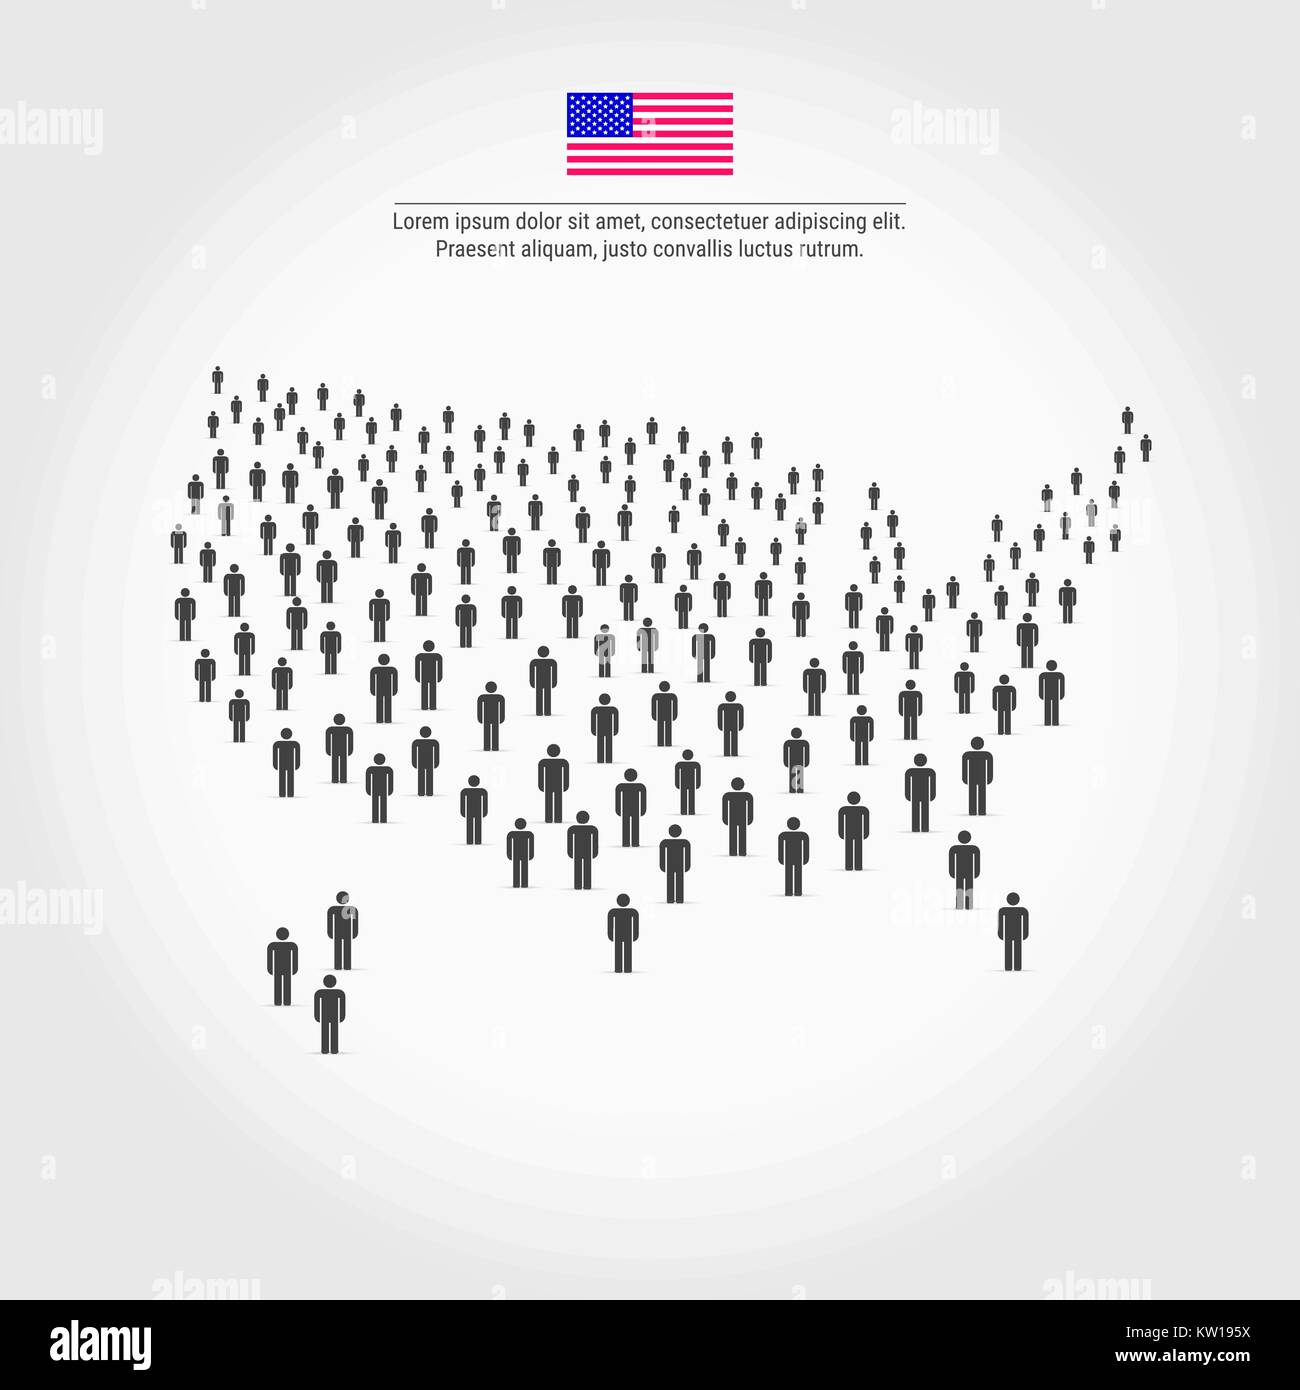 USA People Map. Map of the United States Made Up of a Crowd of People Icons Stock Vector